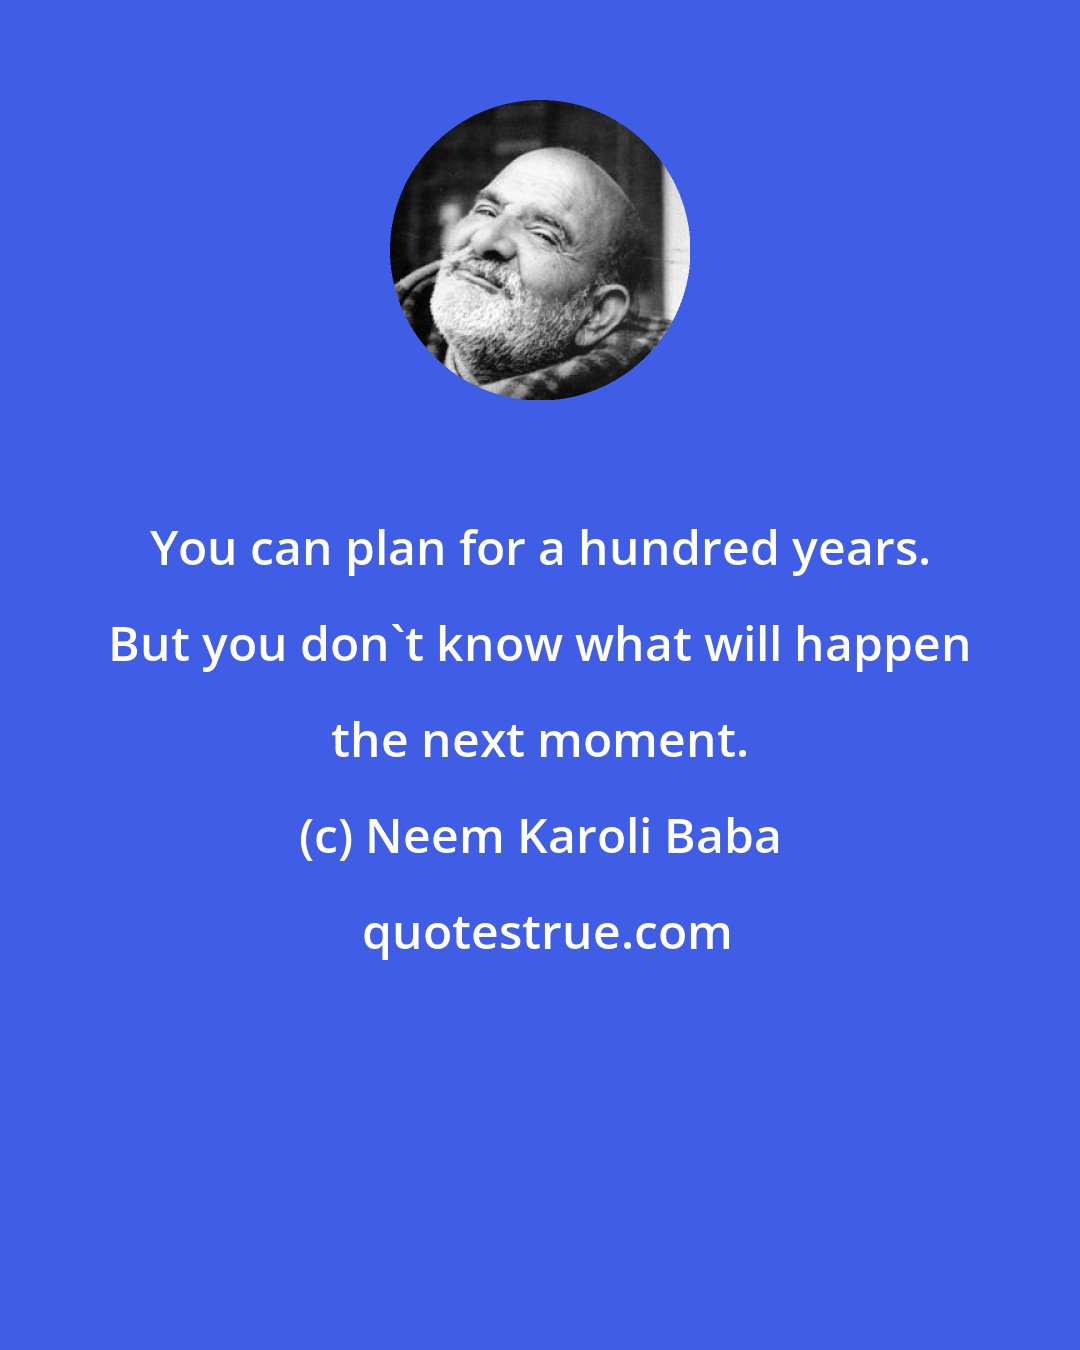 Neem Karoli Baba: You can plan for a hundred years. But you don't know what will happen the next moment.